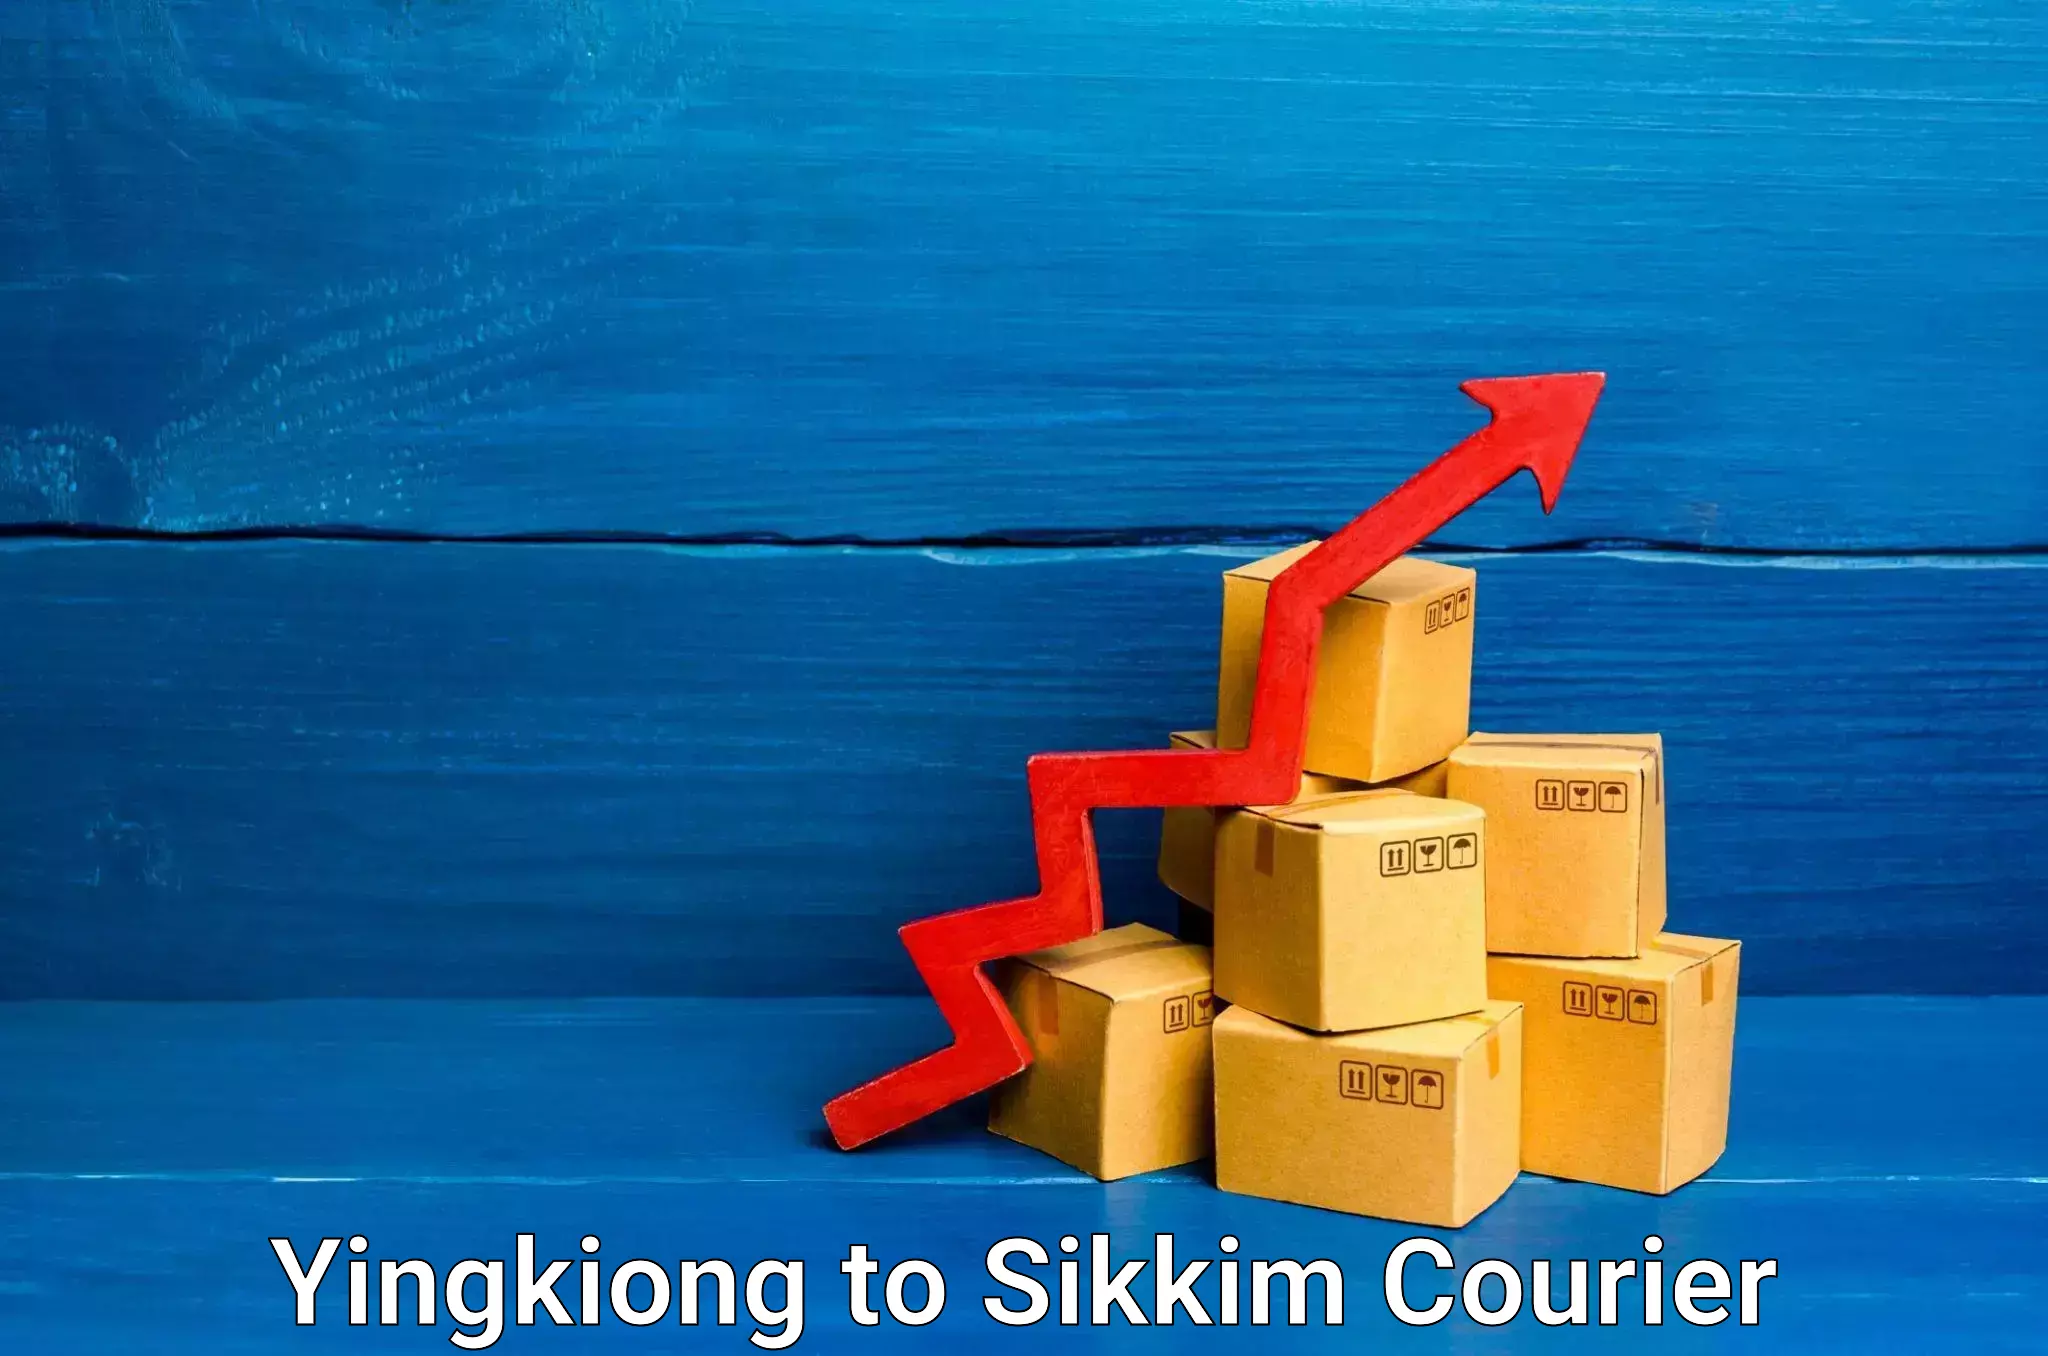 Logistics service provider Yingkiong to Sikkim